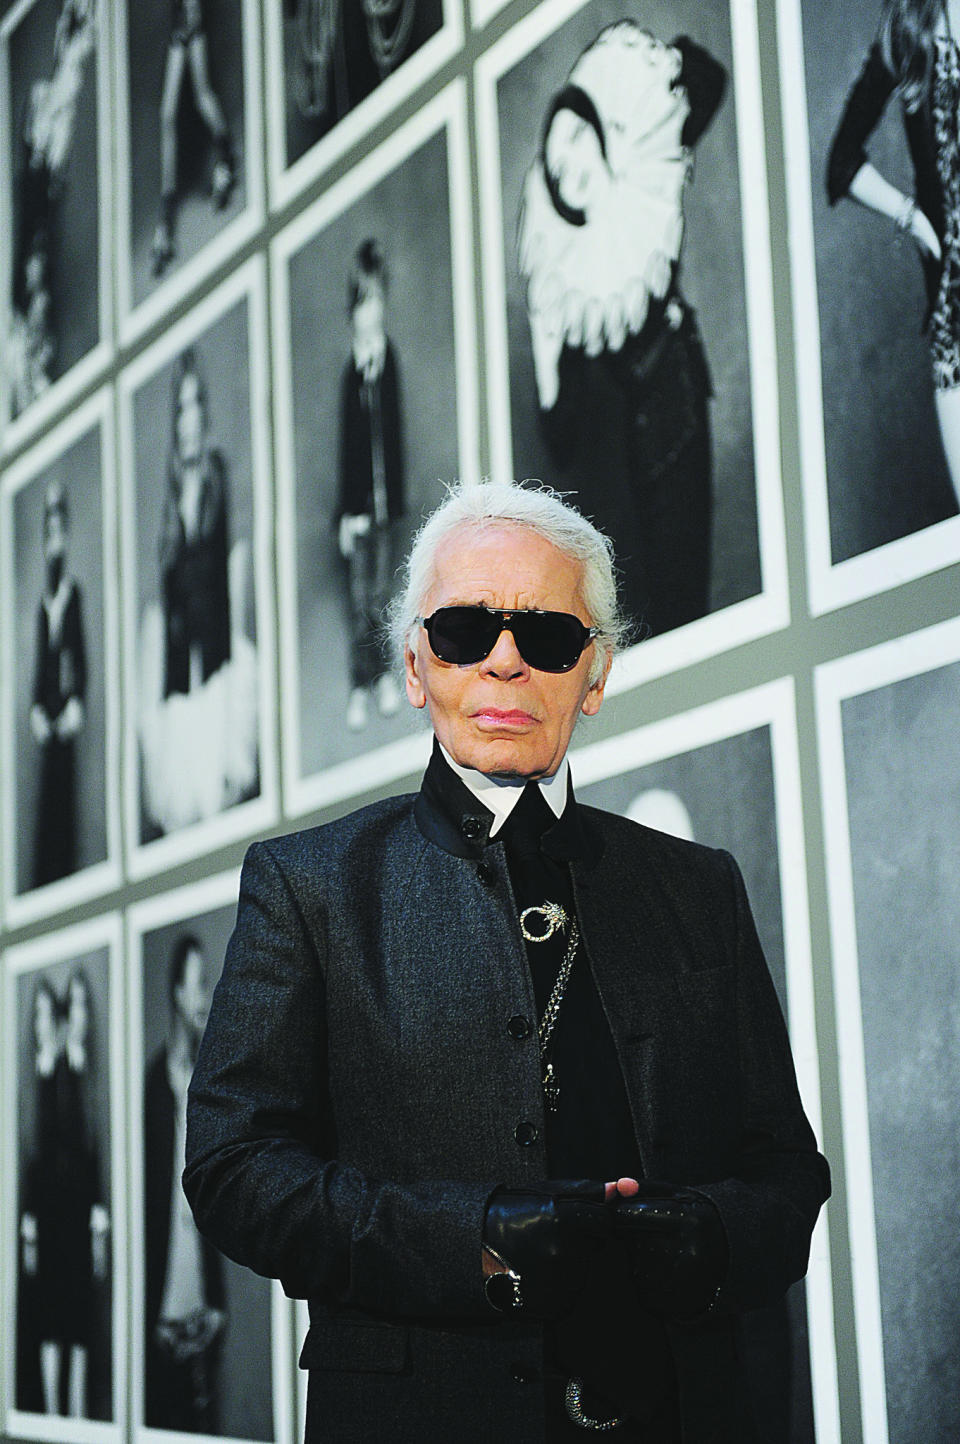 Karl Lagerfeld at the Swiss Institute ahead of his “The Little Black Jacket?”exhibit debut.